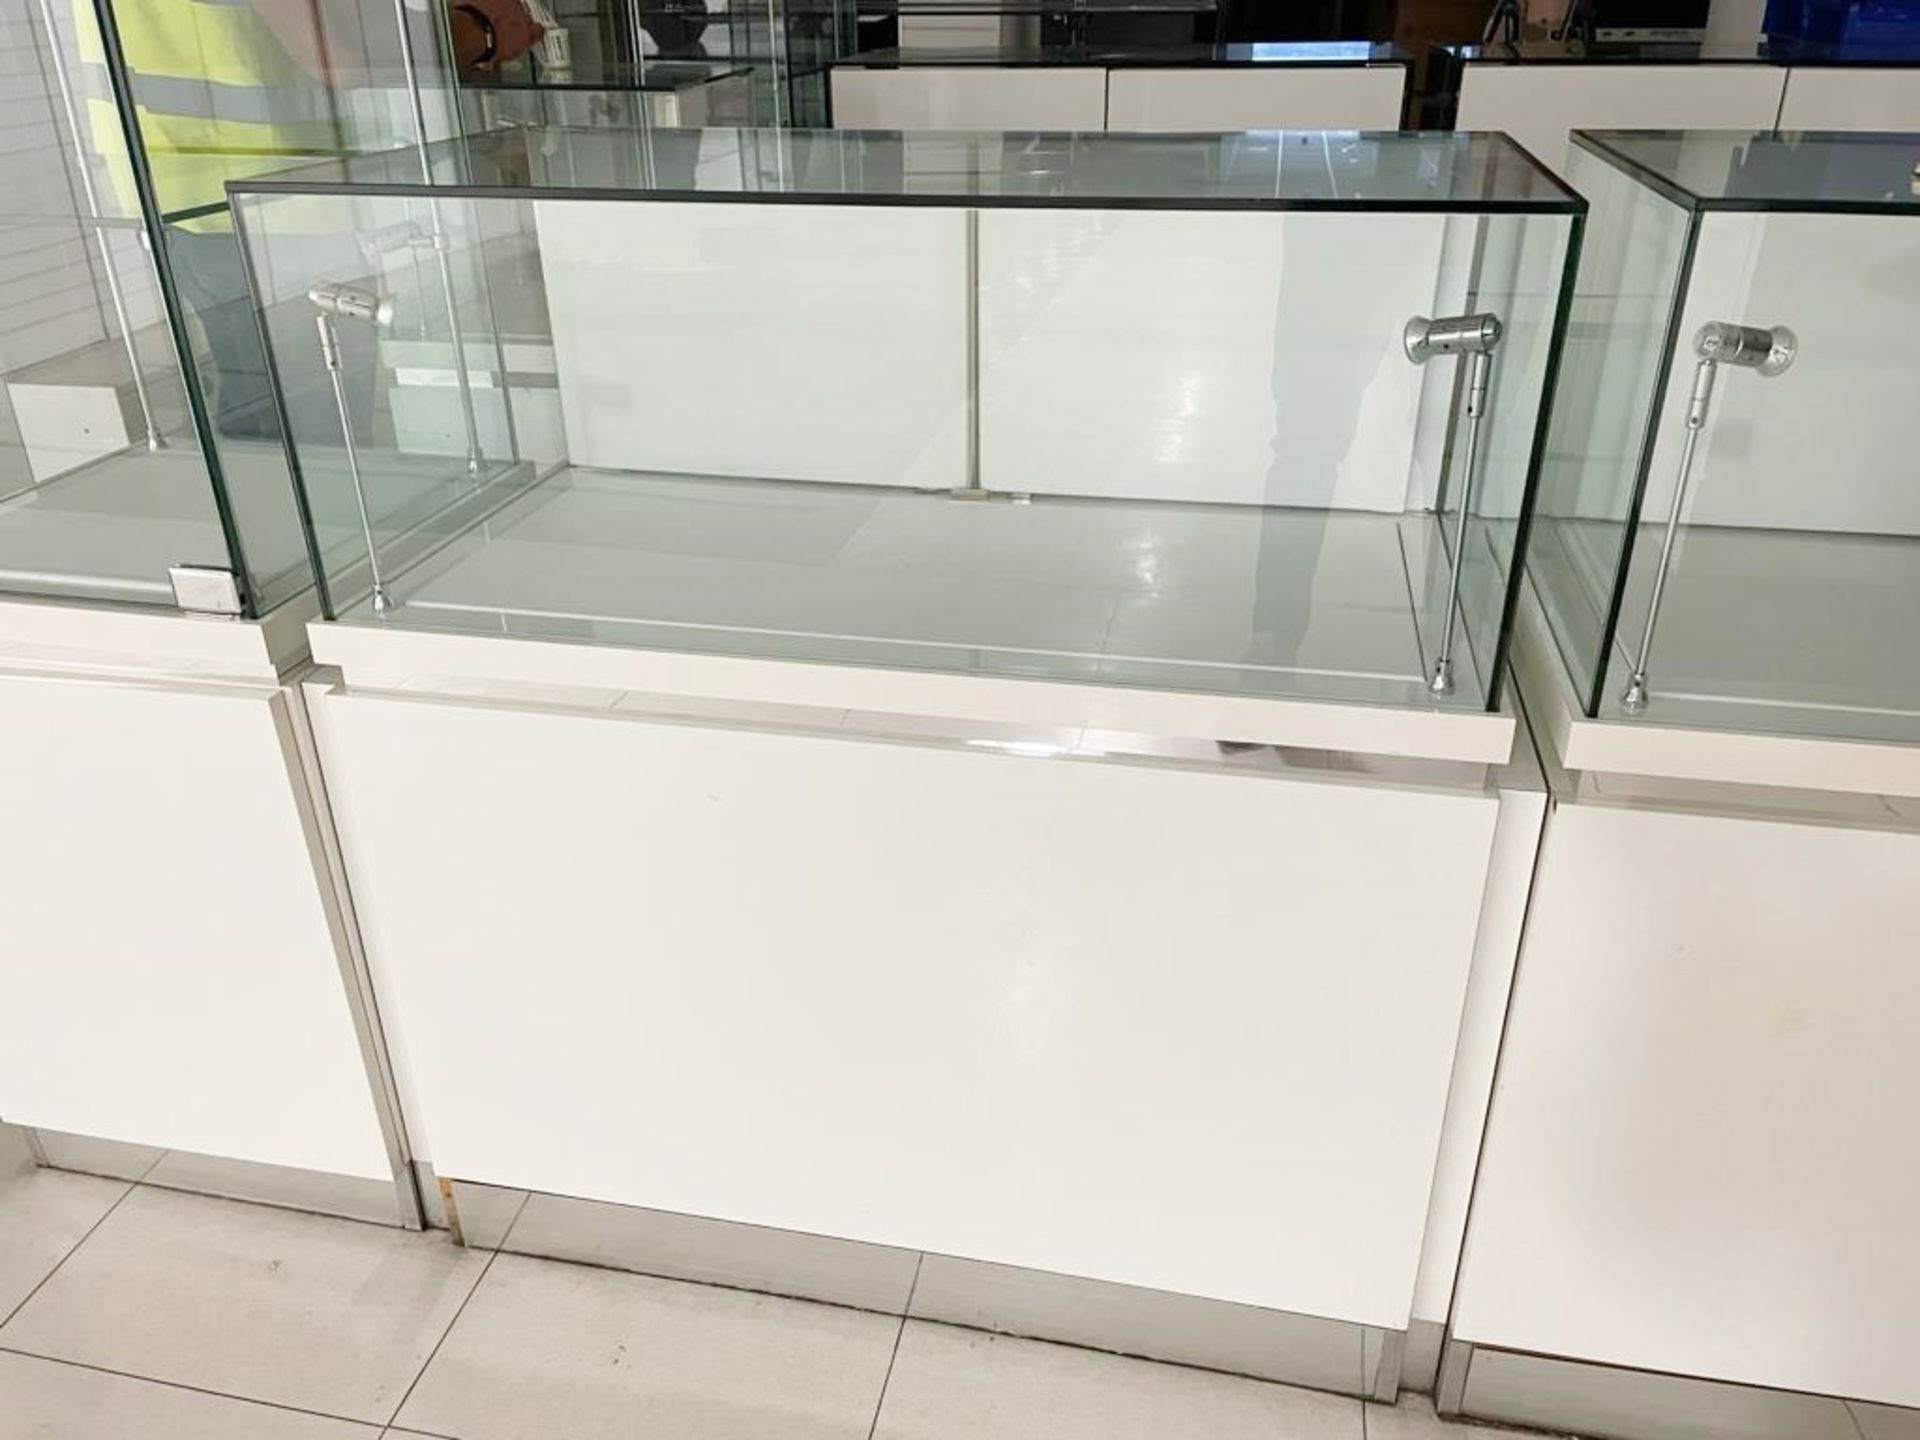 8 x Retail Glass Display Case Counter Cabinets - Features White Gloss Finish, Safety Glass, Internal - Image 2 of 13